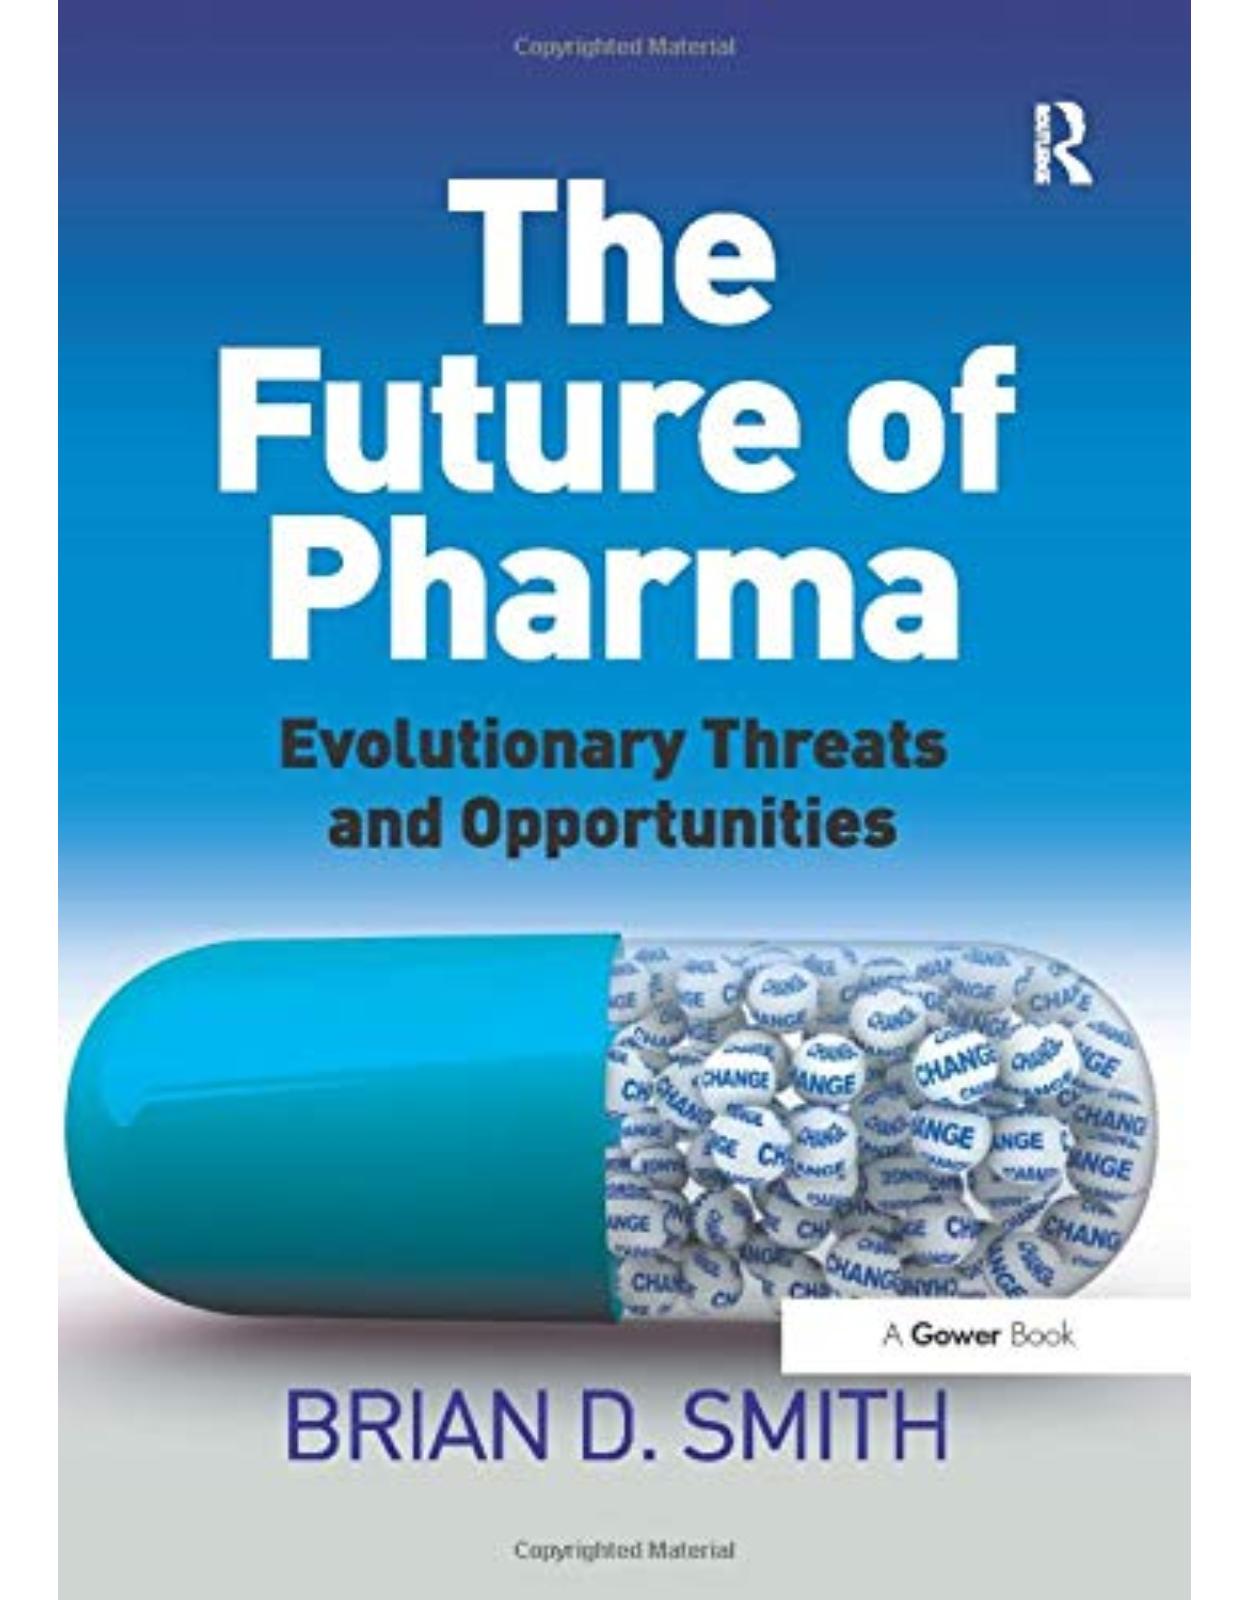 The Future of Pharma: Evolutionary Threats and Opportunities